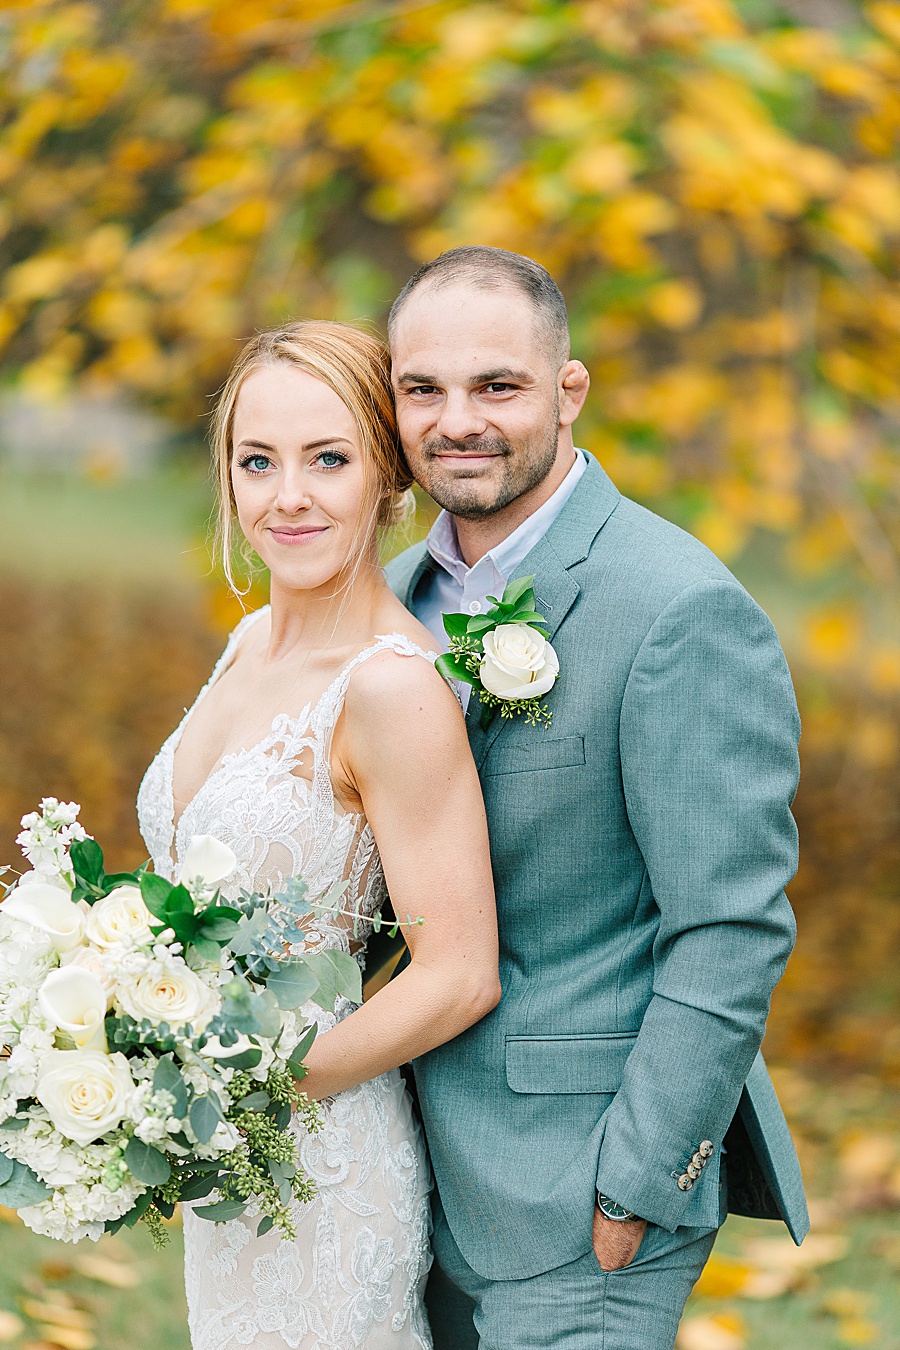 Bride & Groom at park wedding in Knoxville TN by Mandy Hart Photo, Knoxville TN Wedding Photographer